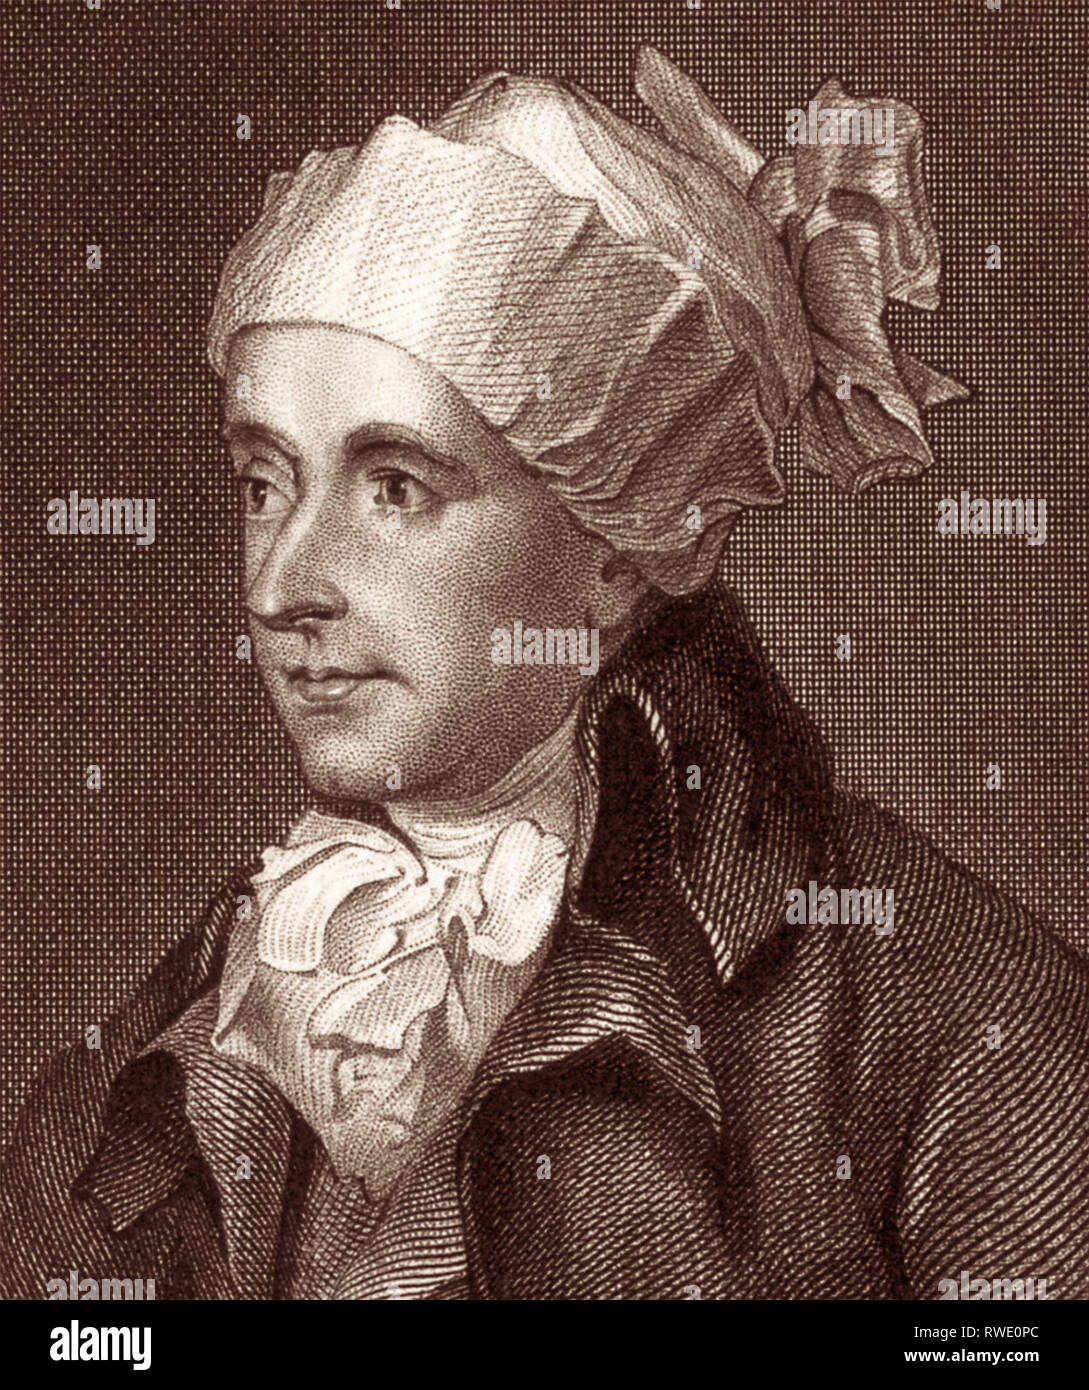 William Cowper (1731-1800) was an English hymn writer and one of the most popular poets of his time. Stock Photo